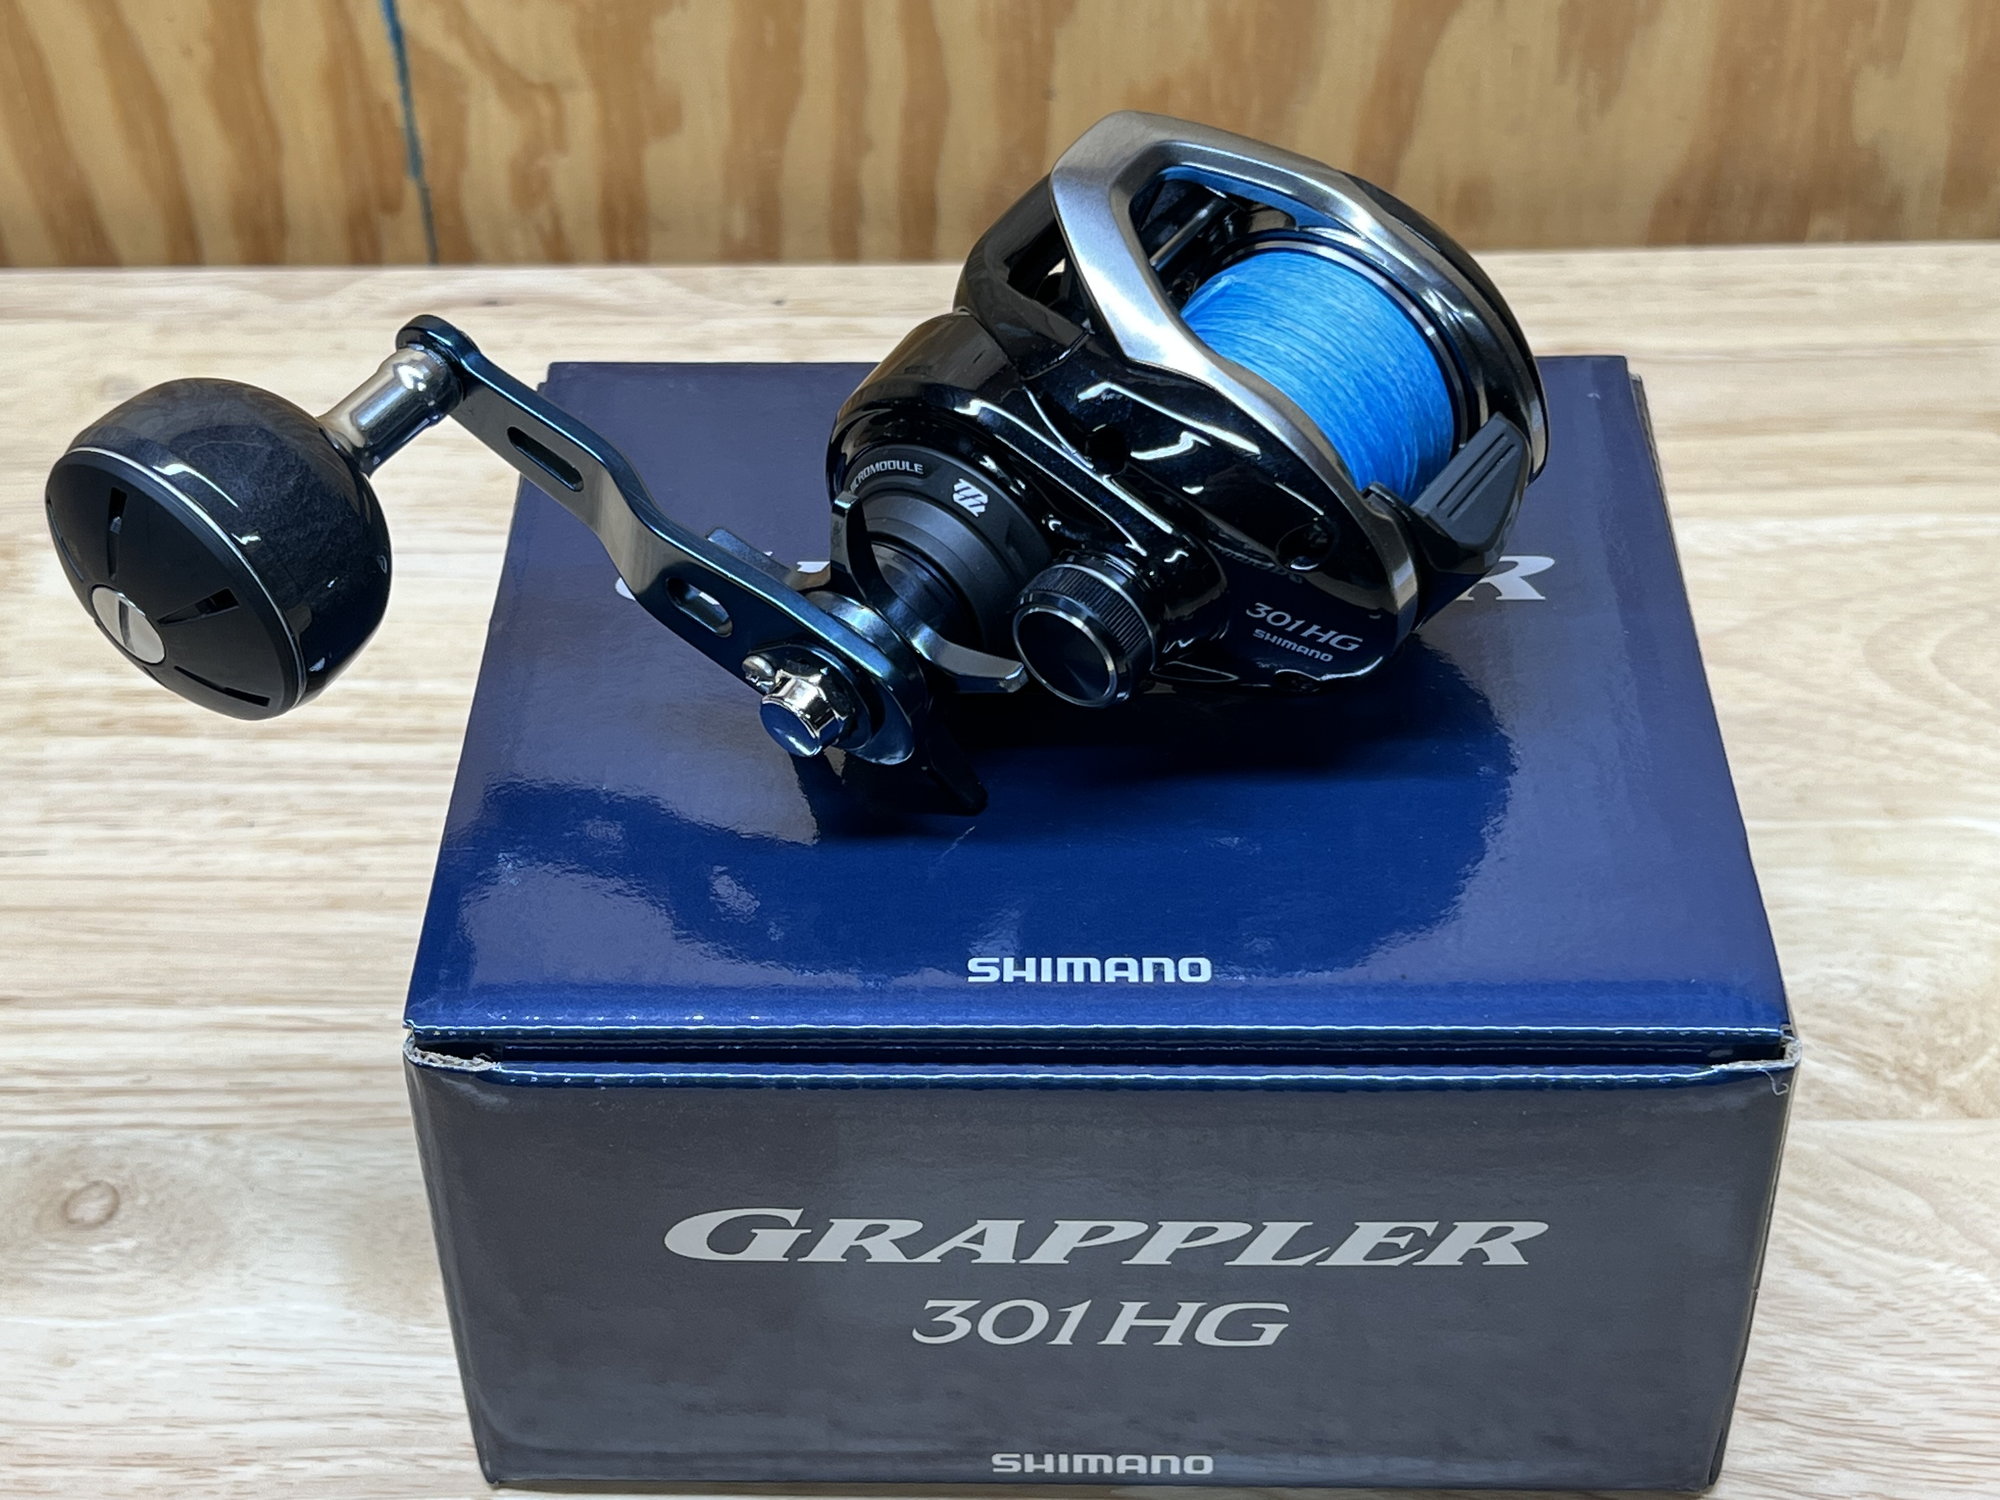 Shimano Grappler 301L Reel - The Hull Truth - Boating and Fishing